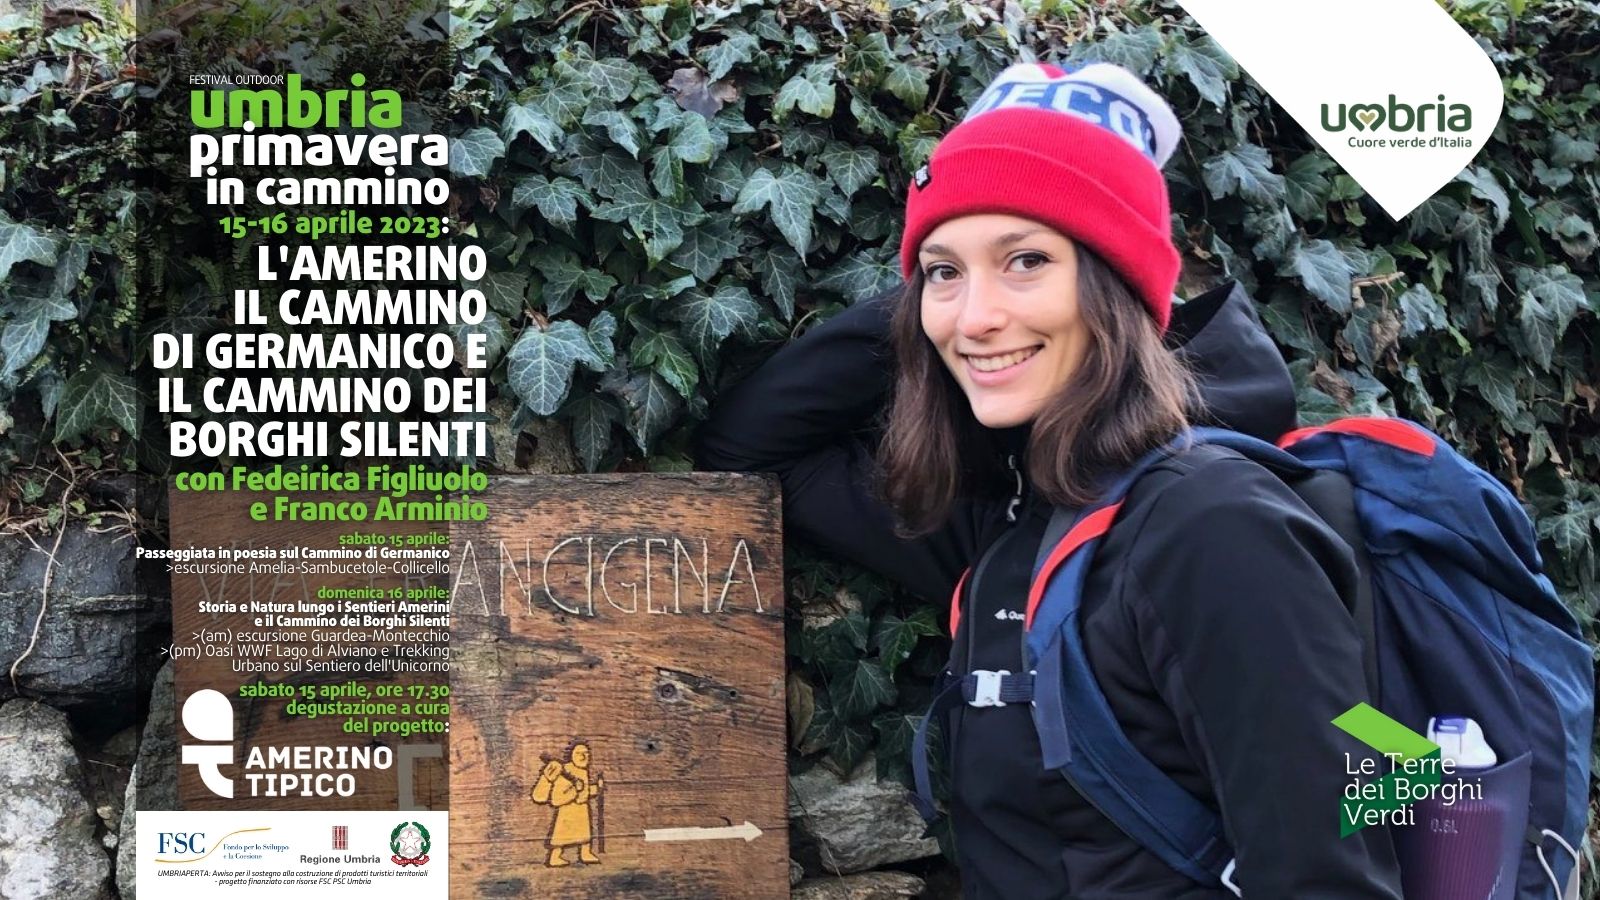 “Umbria Primavera in Cammino” – The products and landscapes of Amerino Tipico are among the protagonists of the outdoor festival, featuring tastings and visits to the villages. The trekking on Saturday, April 15th, 2023, will take place in Amelia (TR)